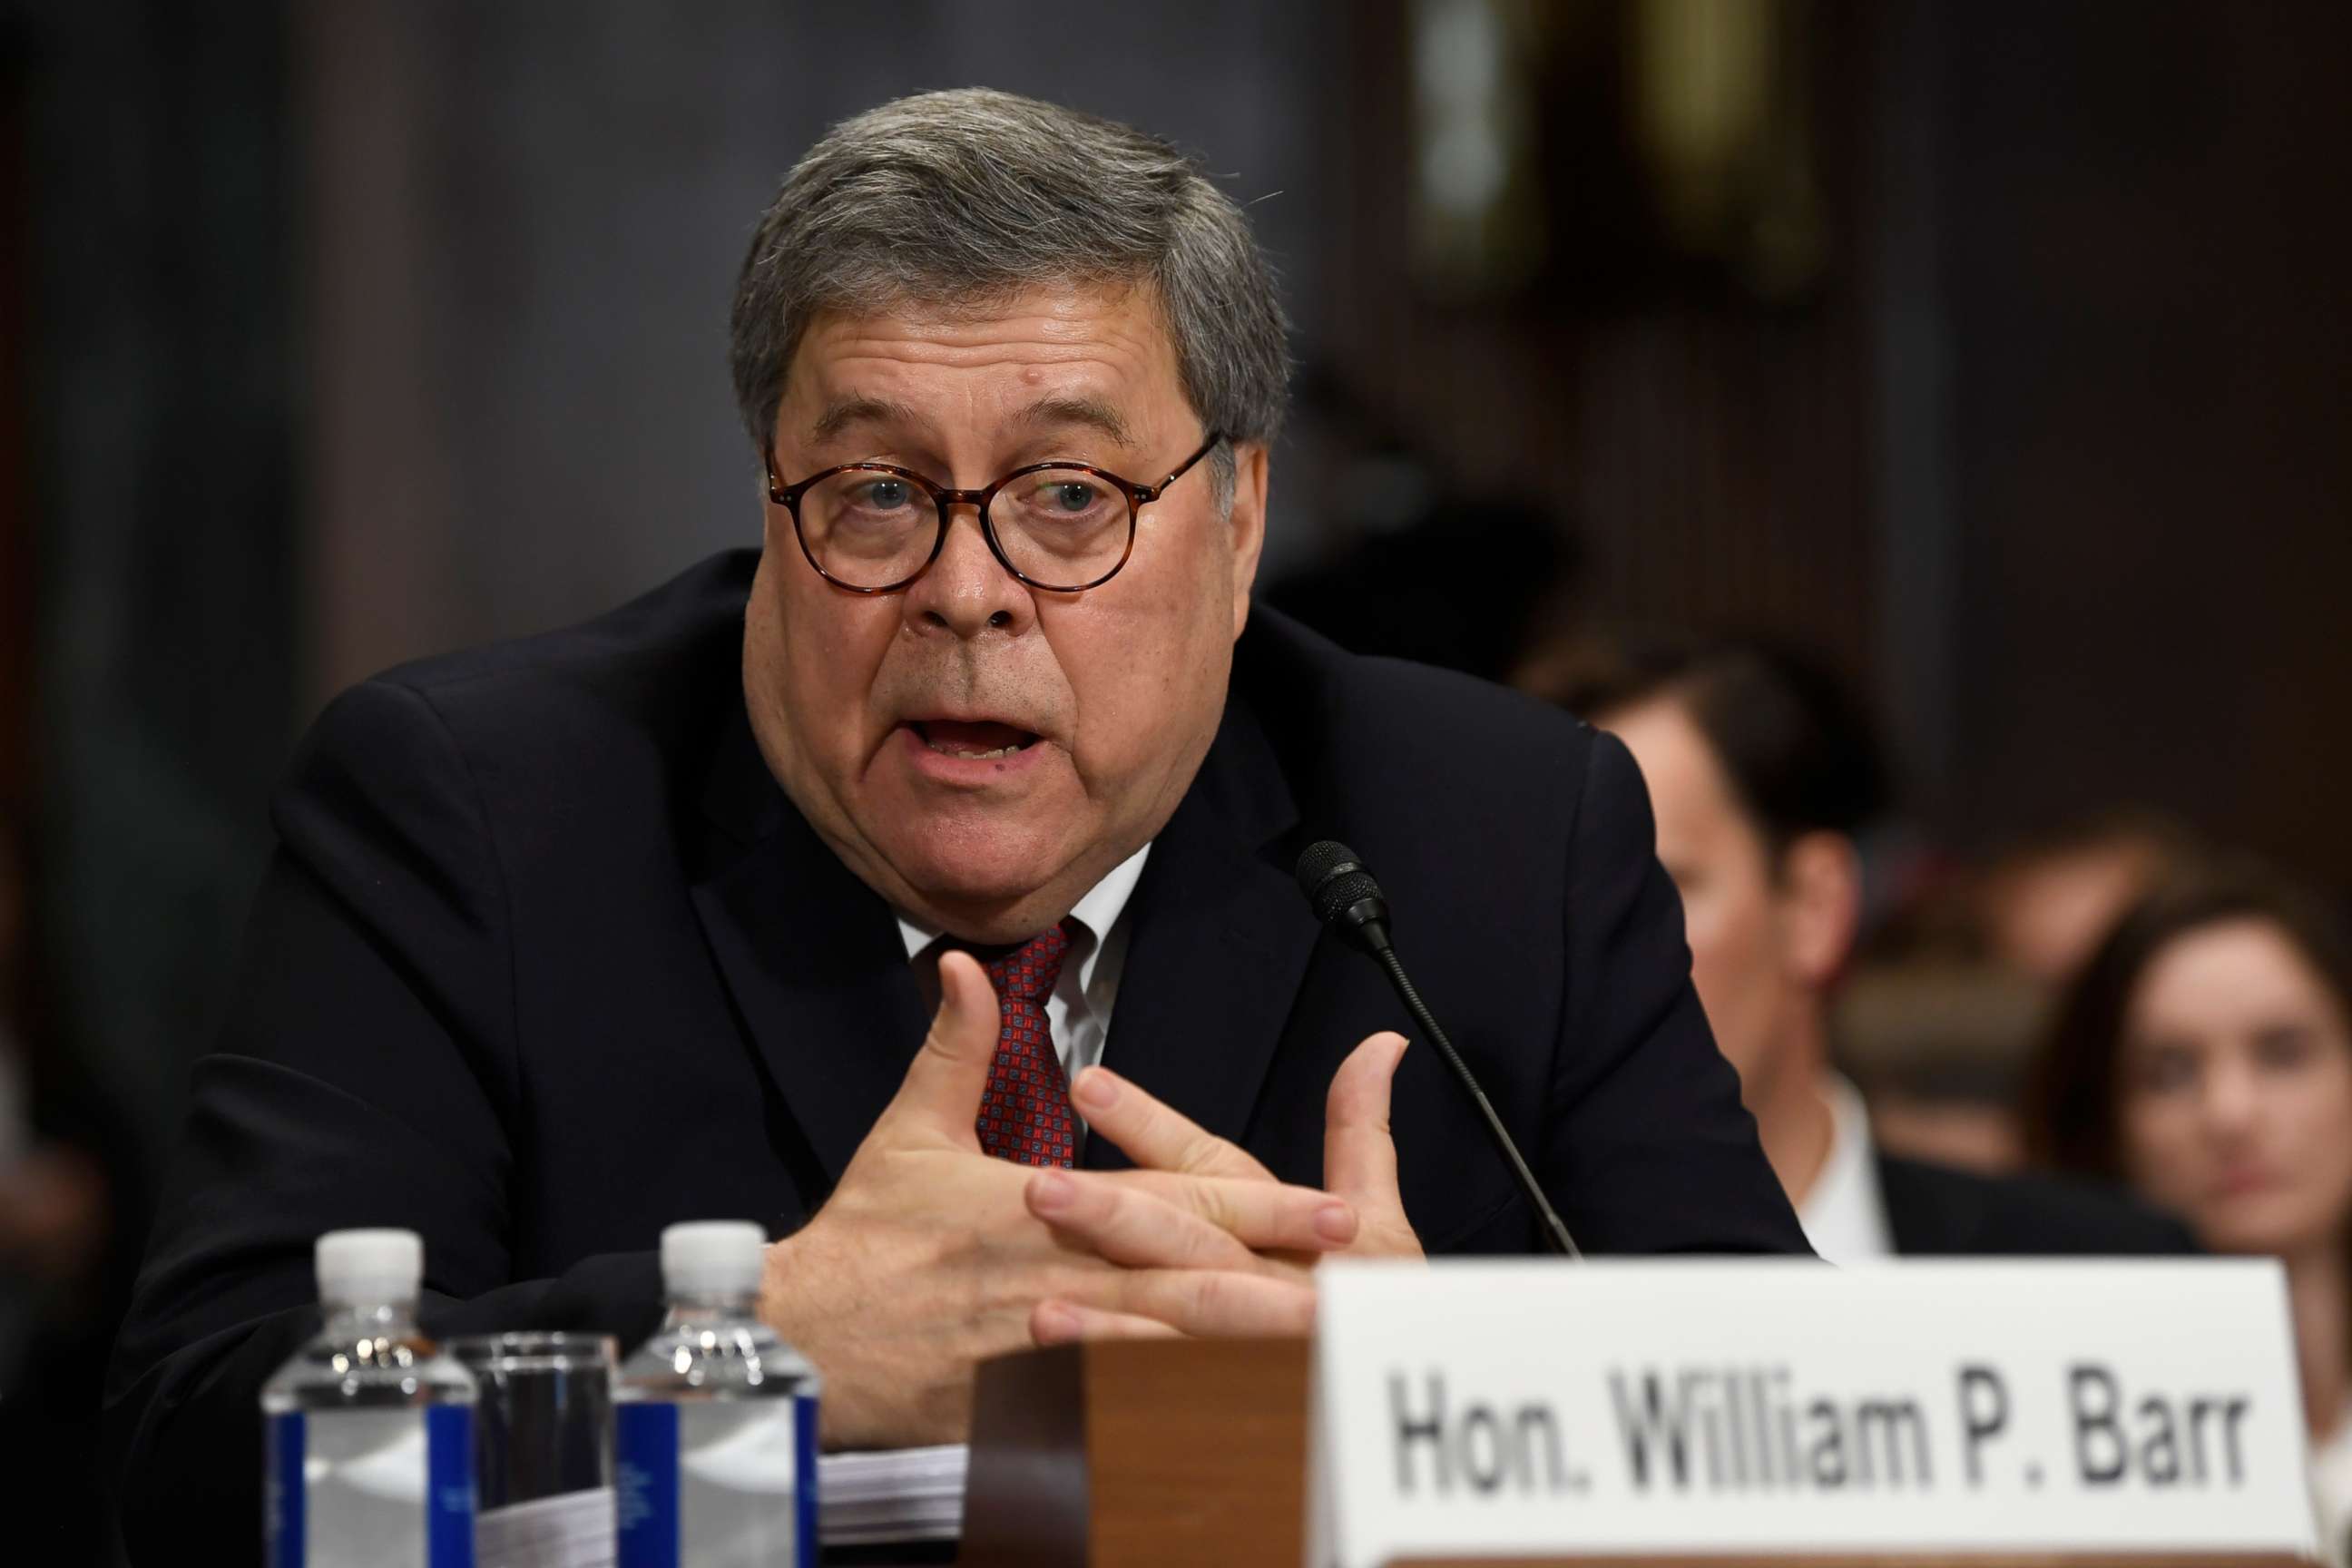 PHOTO: Attorney General William Barr responds as he is asked a question from Sen. Richard Blumenthal during testimony before the Senate Judiciary Committee on Capitol Hill in Washington, May 1, 2019.